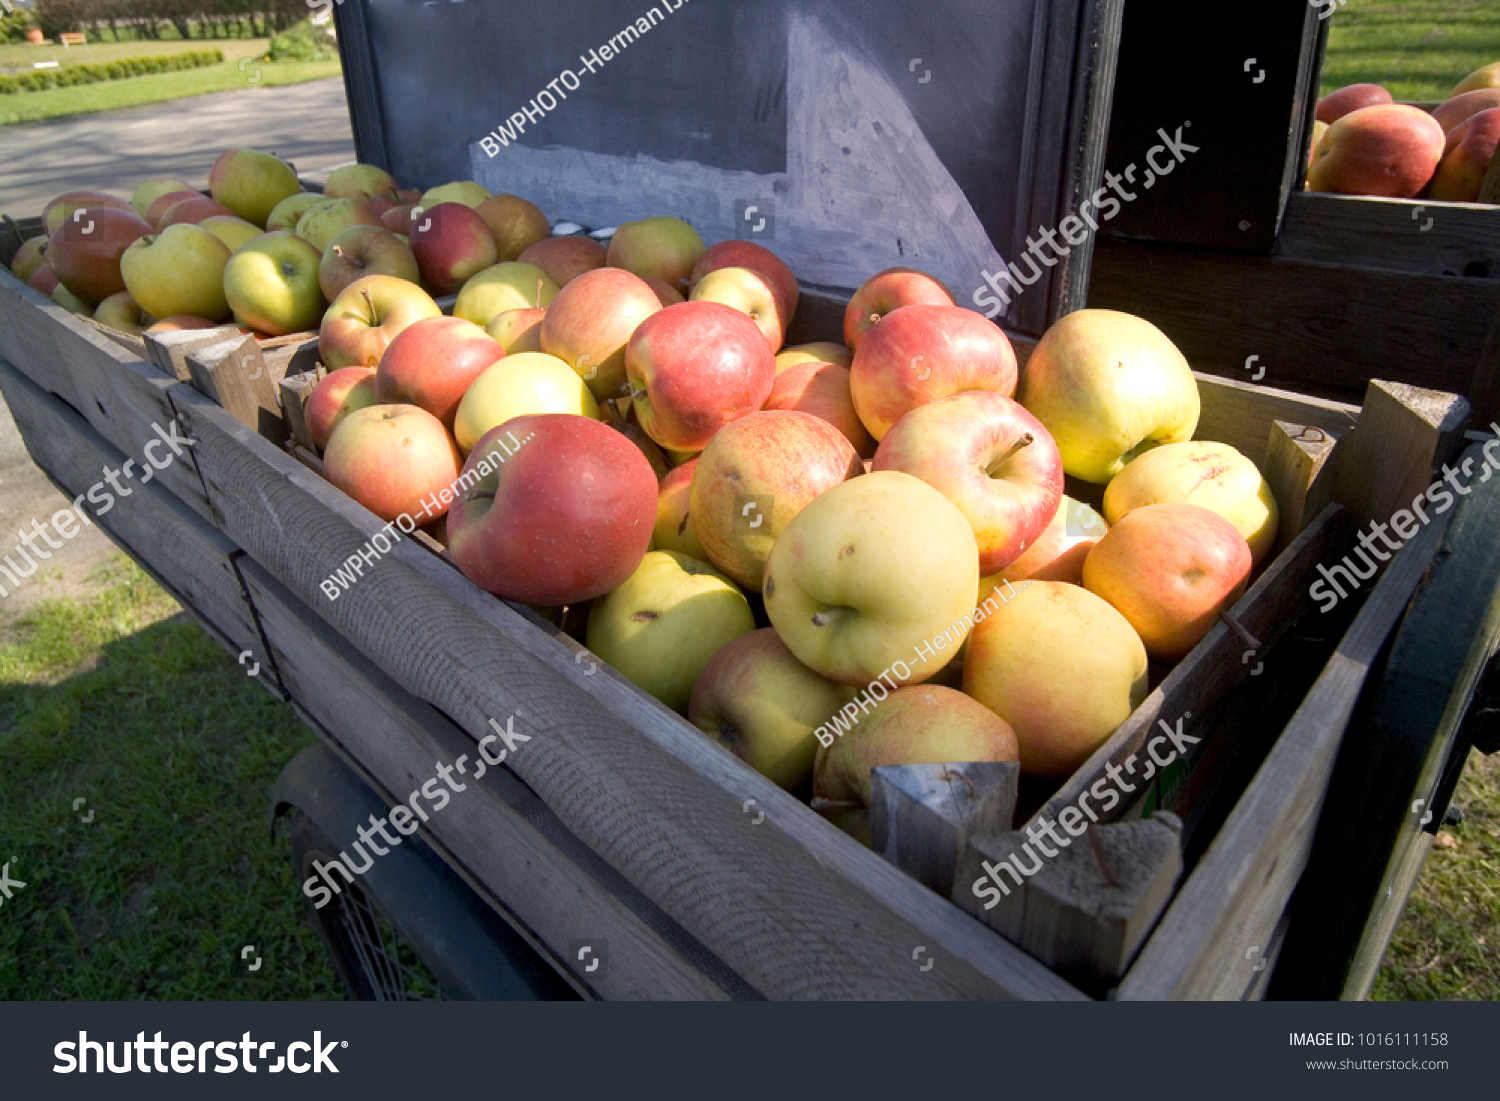 Apples for sale in wooden crates #1016111158